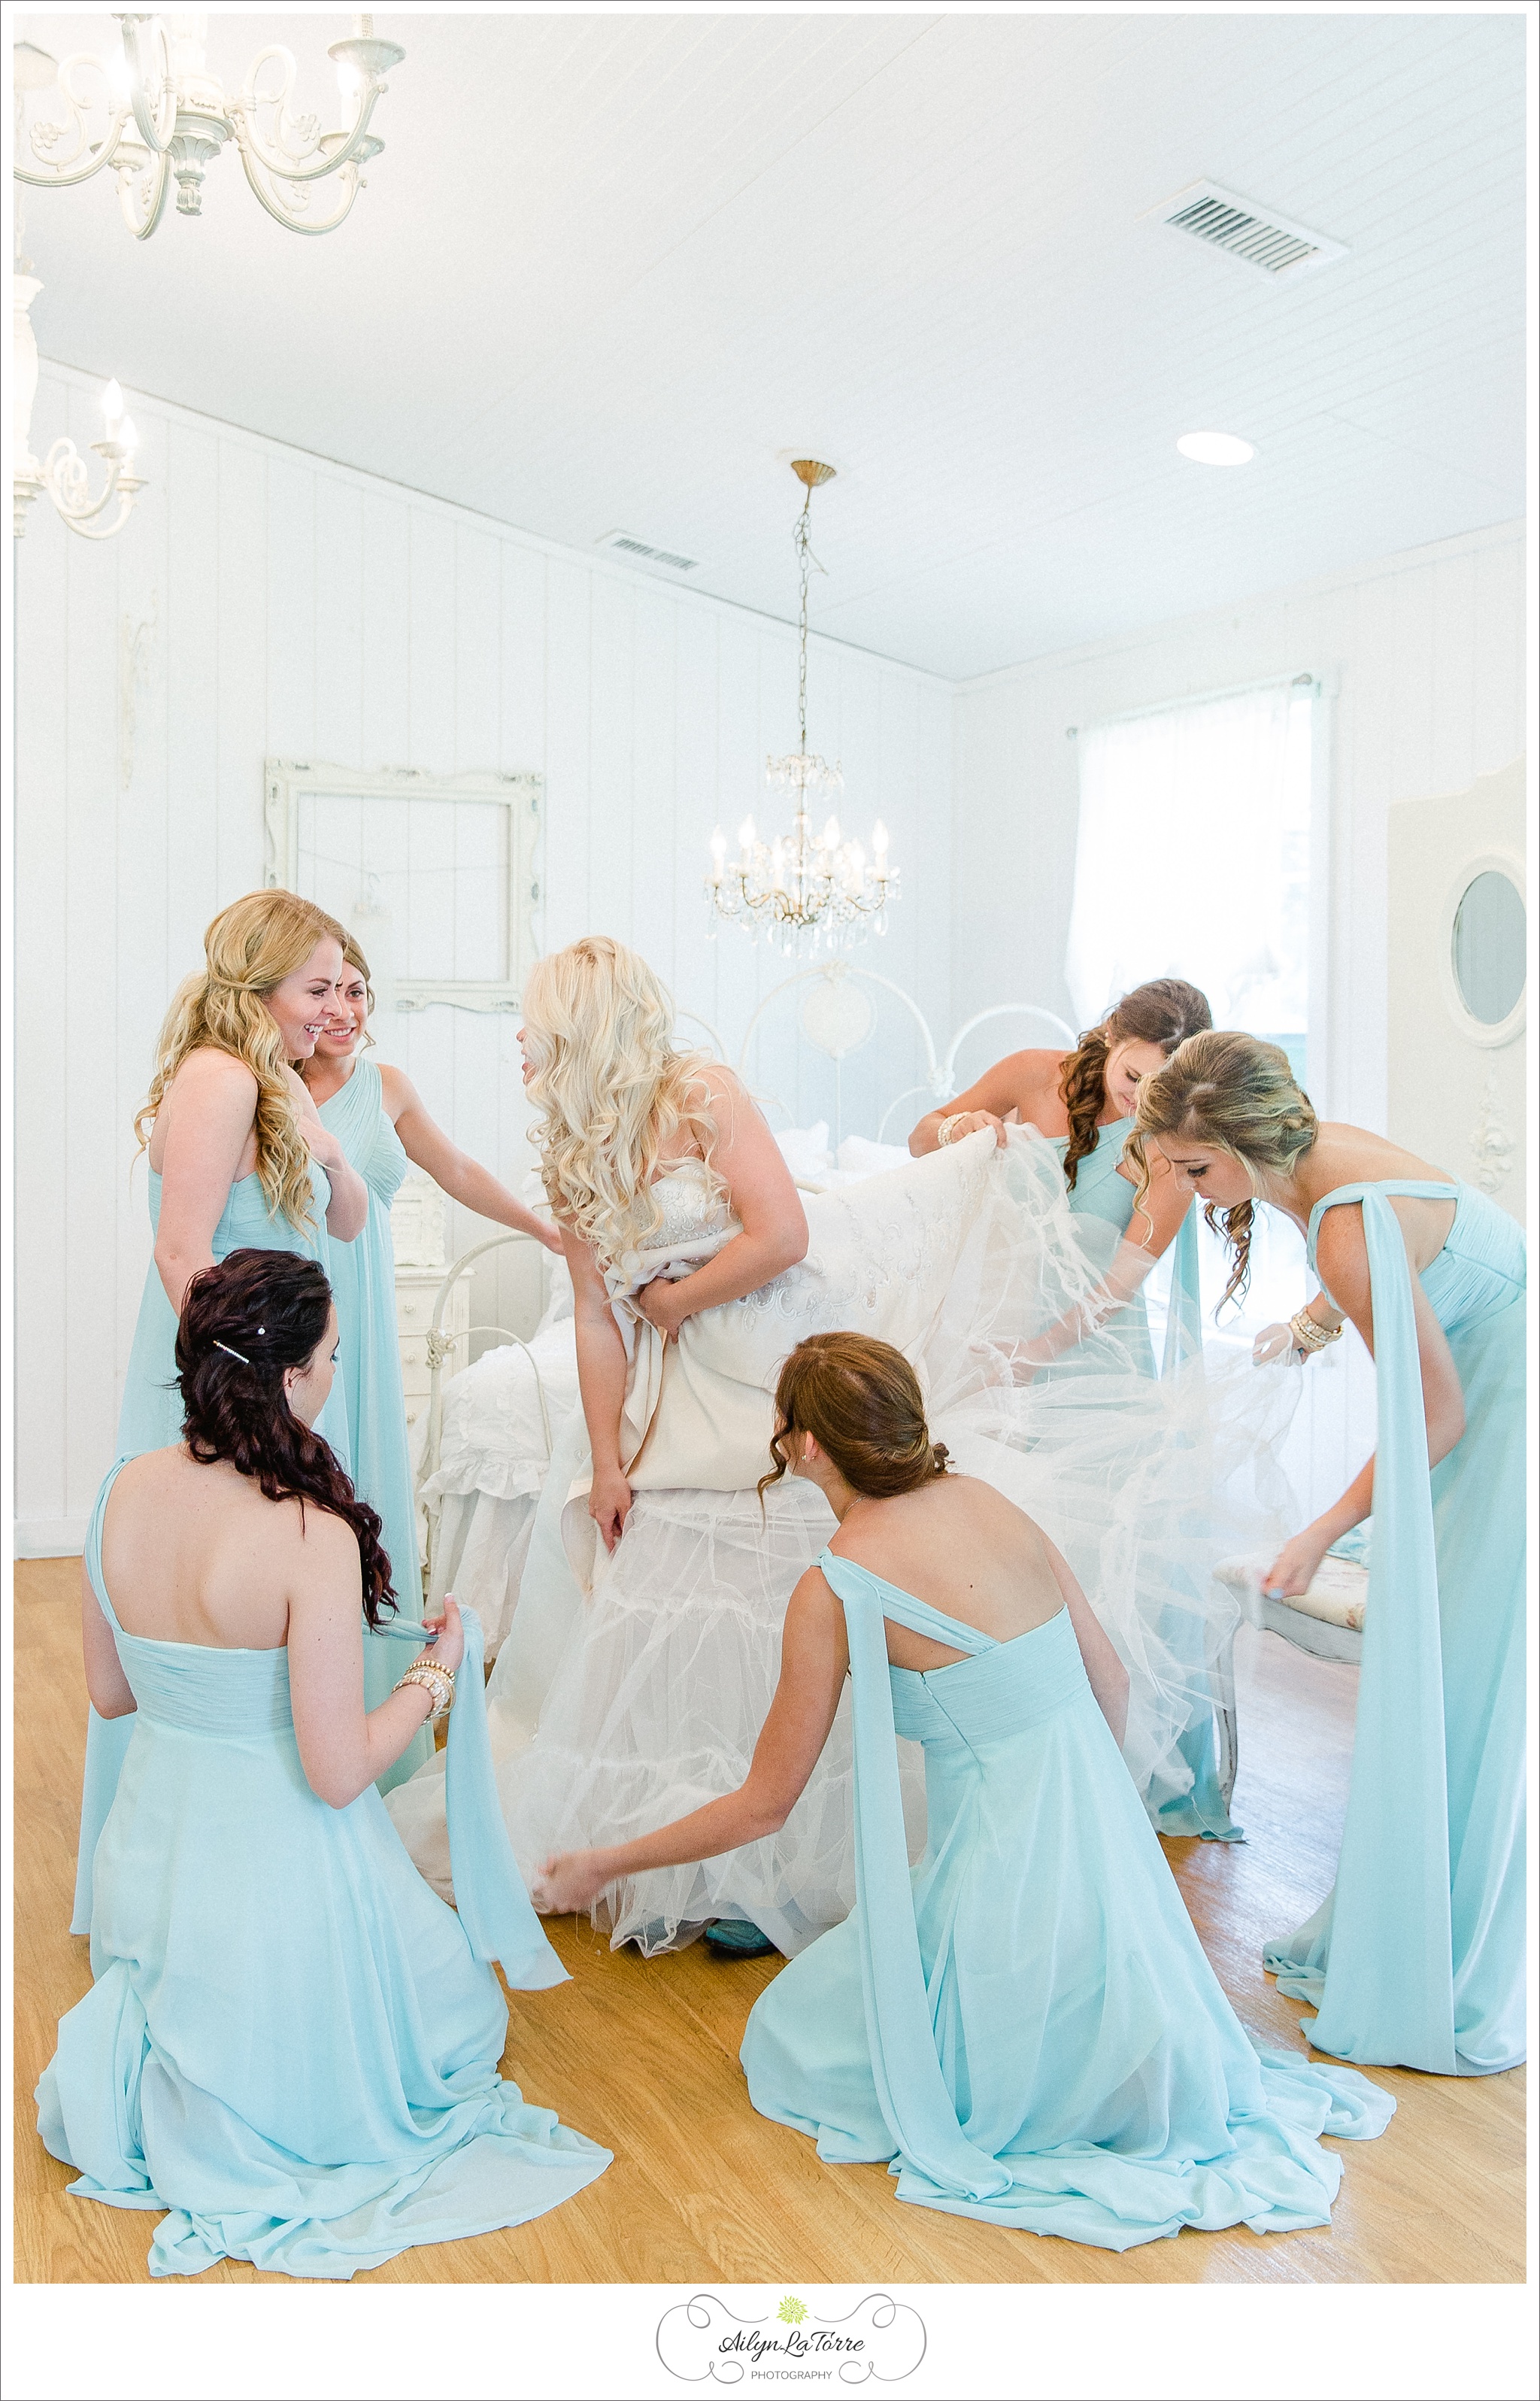 The Southern Barn Wedding | © Ailyn La Torre Photography 2015